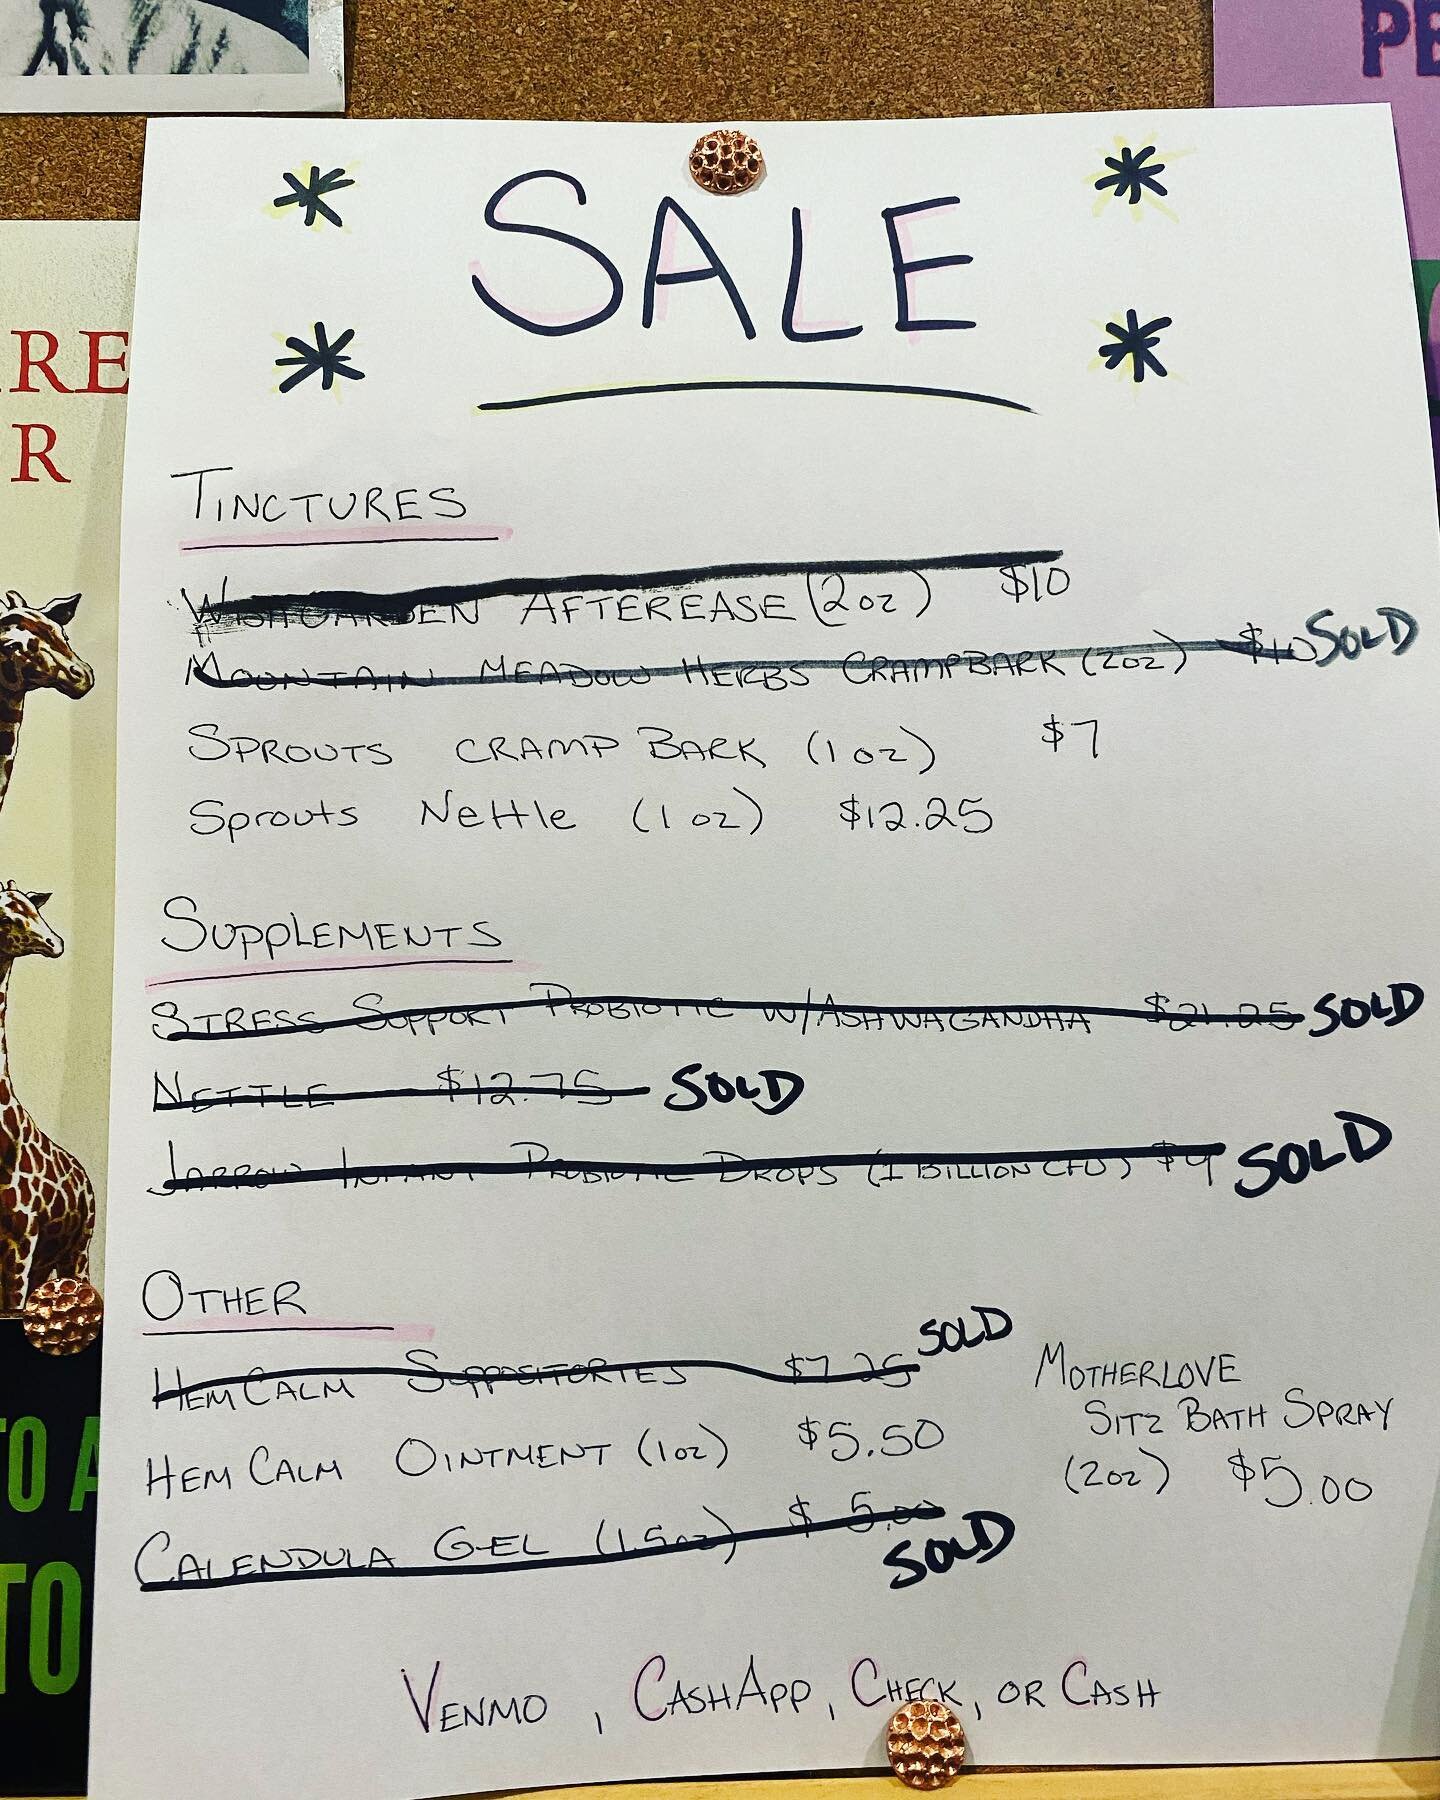 We have a few supplements left from our &ldquo;Sprouts had a big sale!&rdquo; haul. All items are sold at cost. We just couldn&rsquo;t let these awesome deals sit on the shelf! If you are interested, please text us at 404-458-7137 to reserve your ite